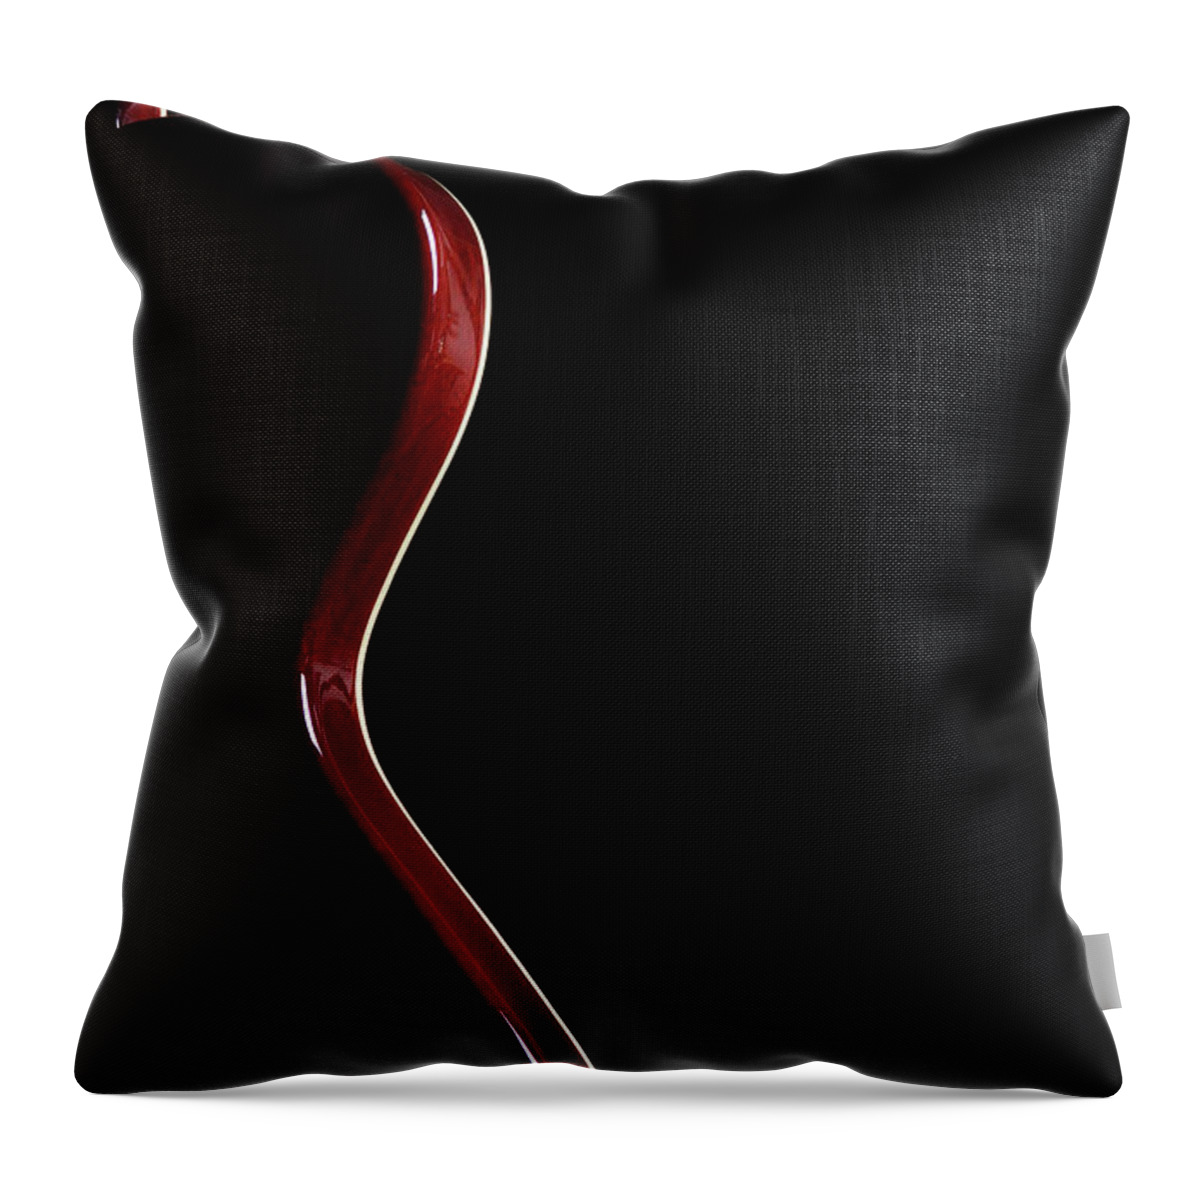 Rock Music Throw Pillow featuring the photograph Electric Countours by Dlewis33